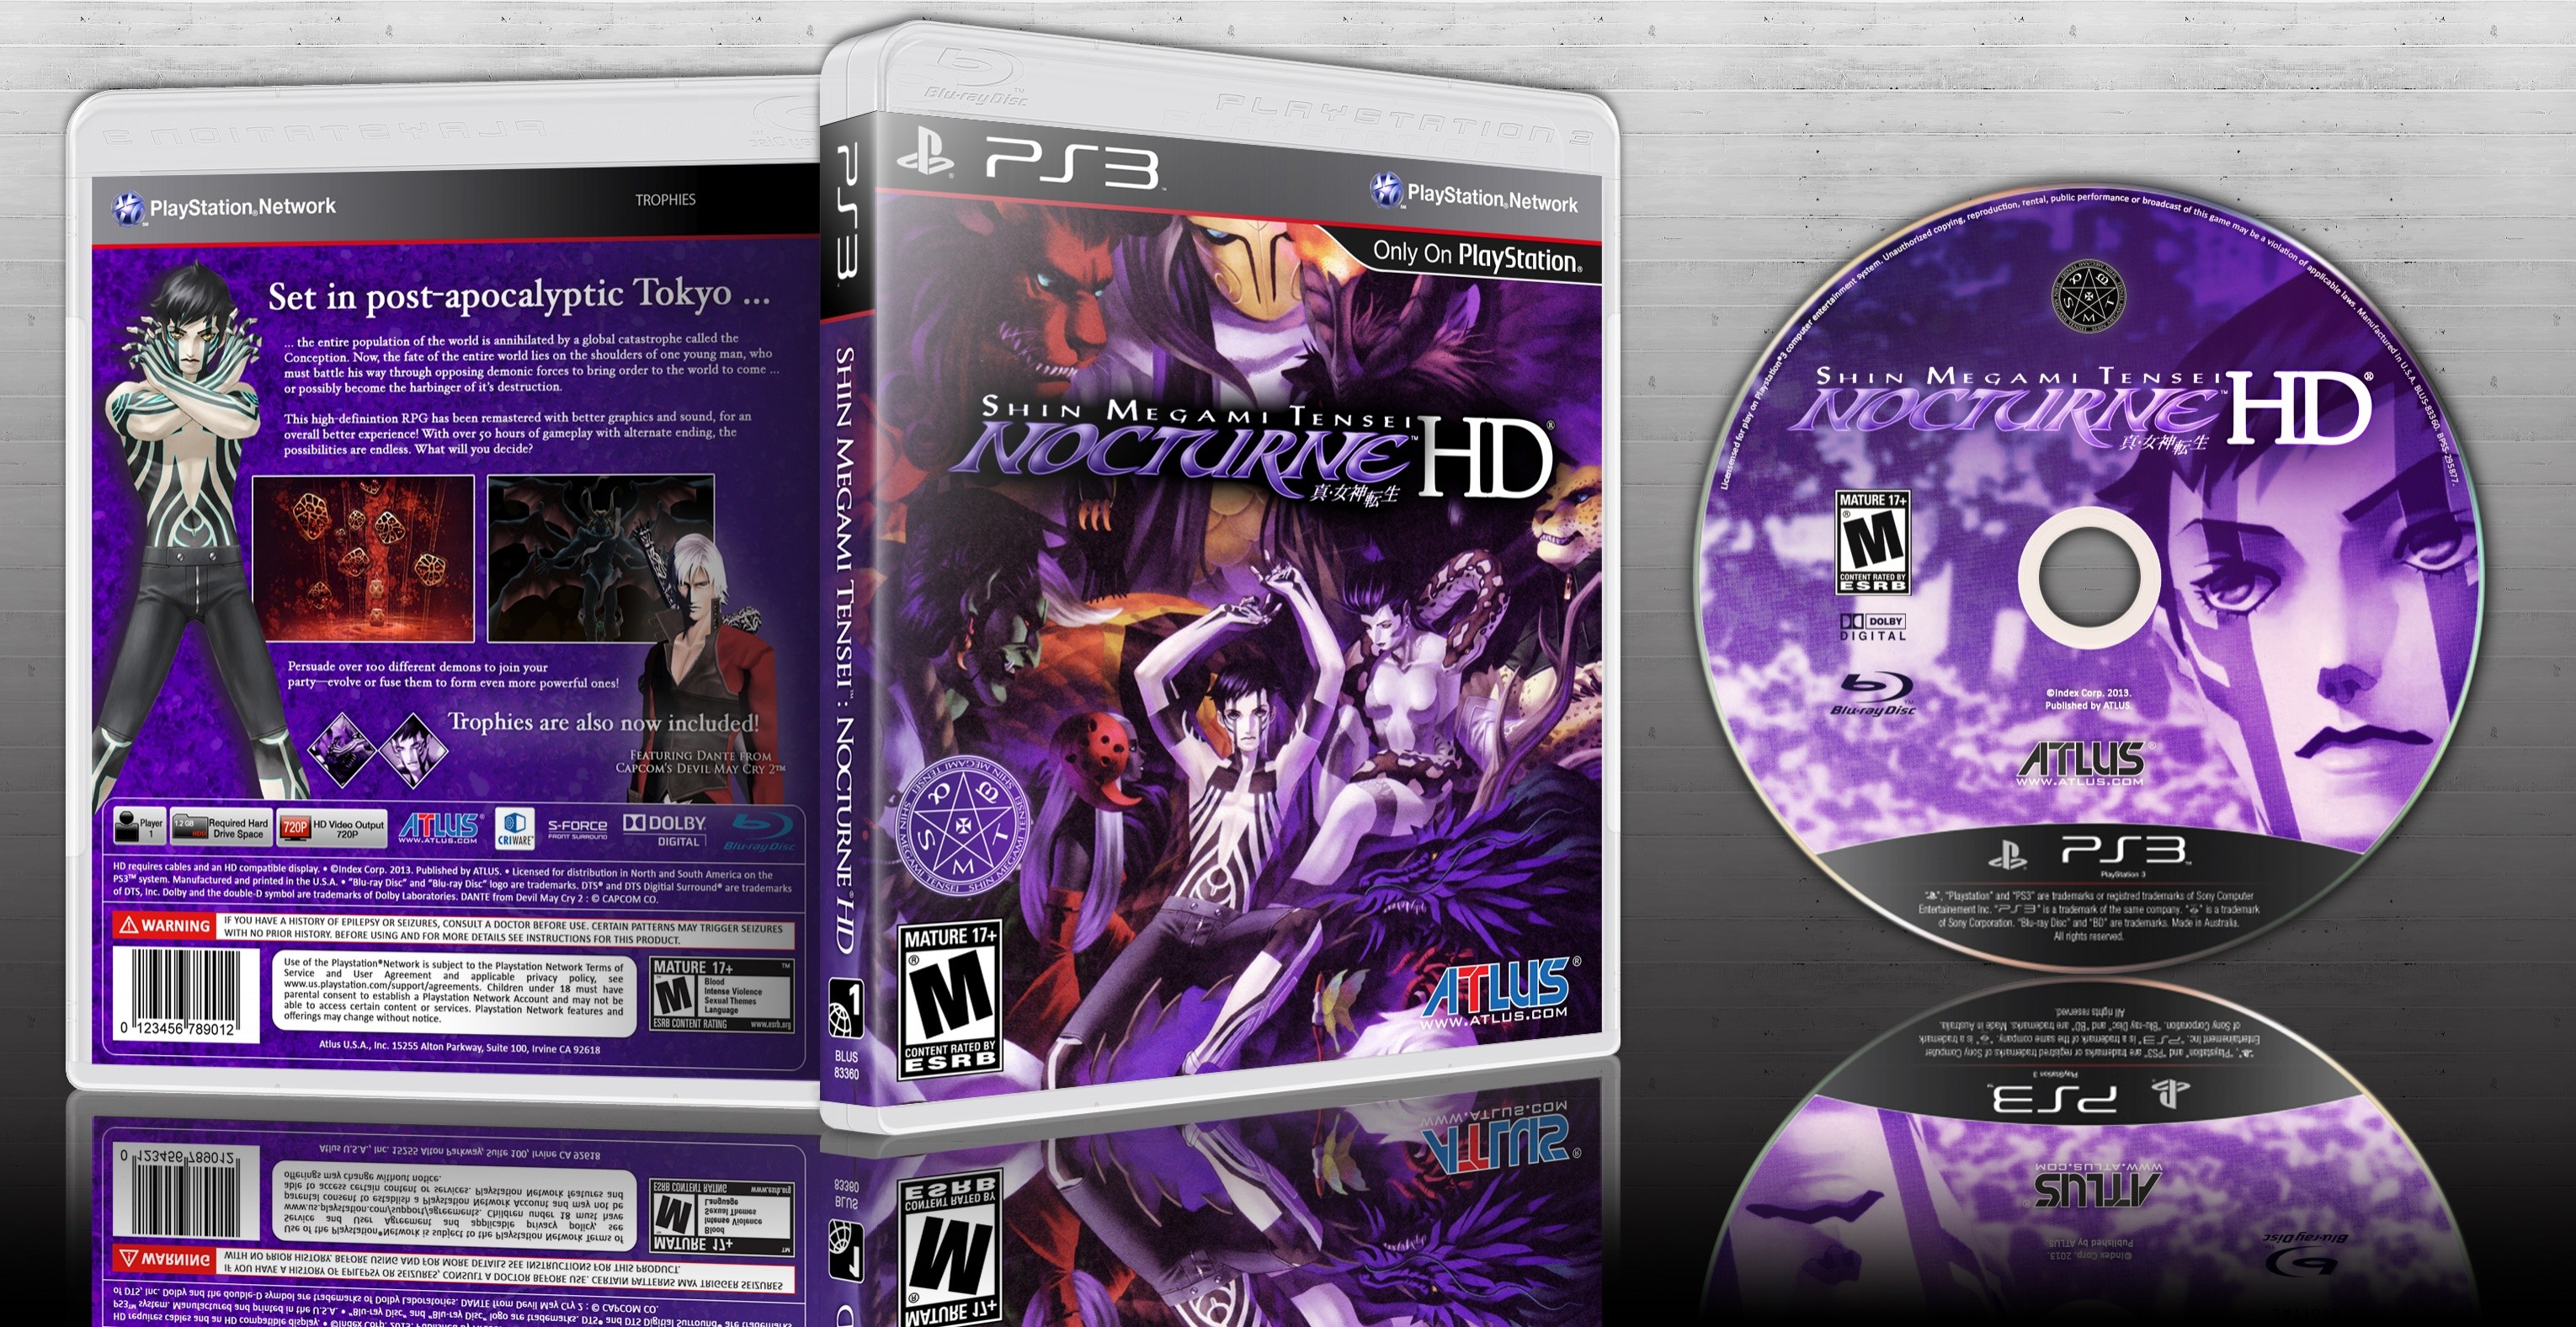 3060x1576 Shin Megami Tensei Nocturne PlayStation 3 Box Art Cover by lucidhalos  